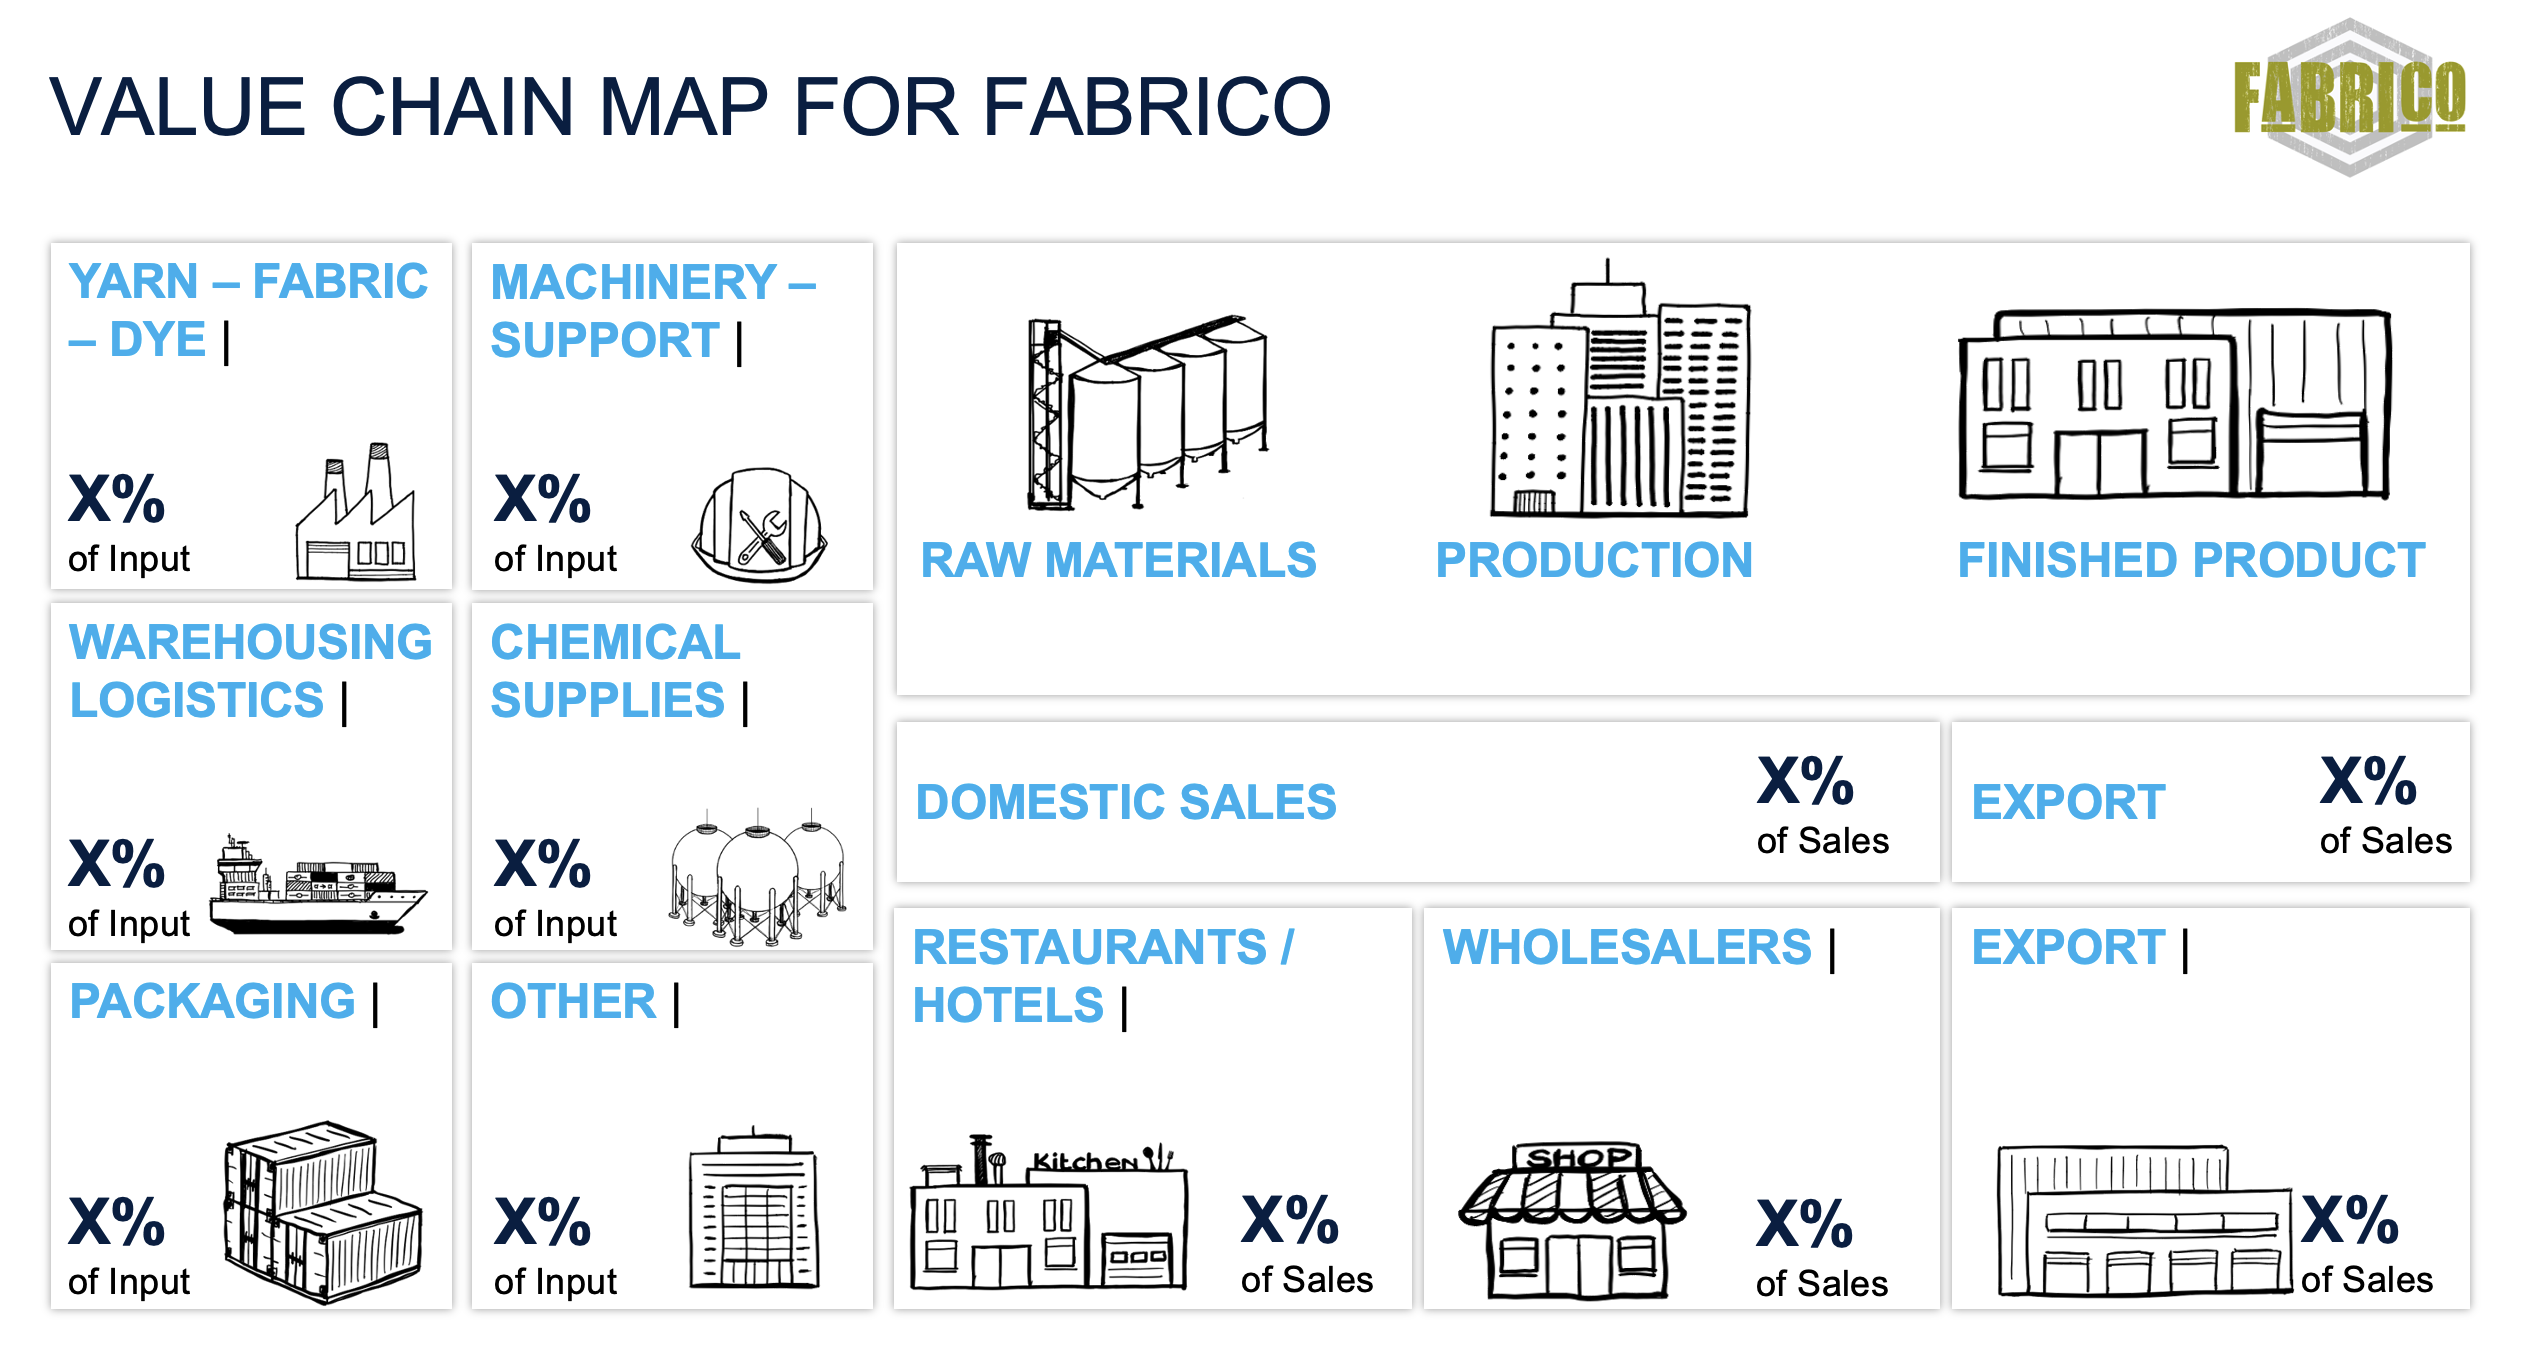 VALUE CHAIN MAP FOR FABRICO